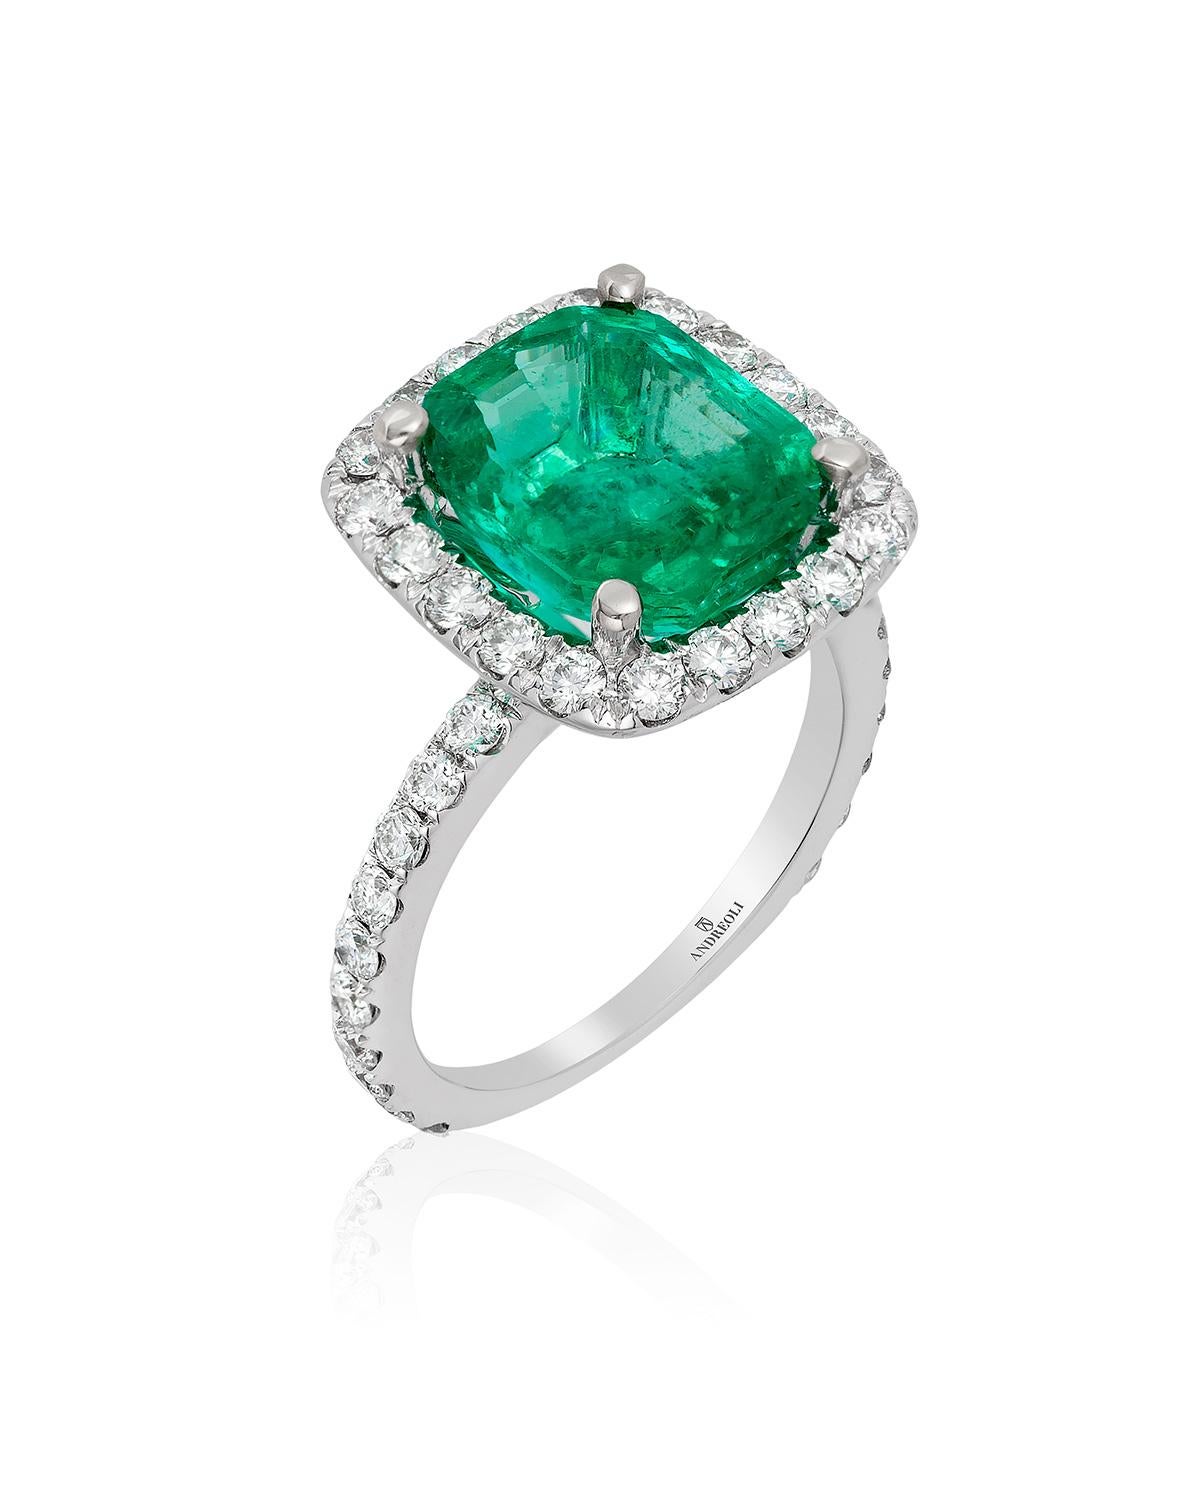 Contemporary Andreoli 4.07 Carat Colombian Emerald CDC Certified Diamond Ring 18 Karat For Sale